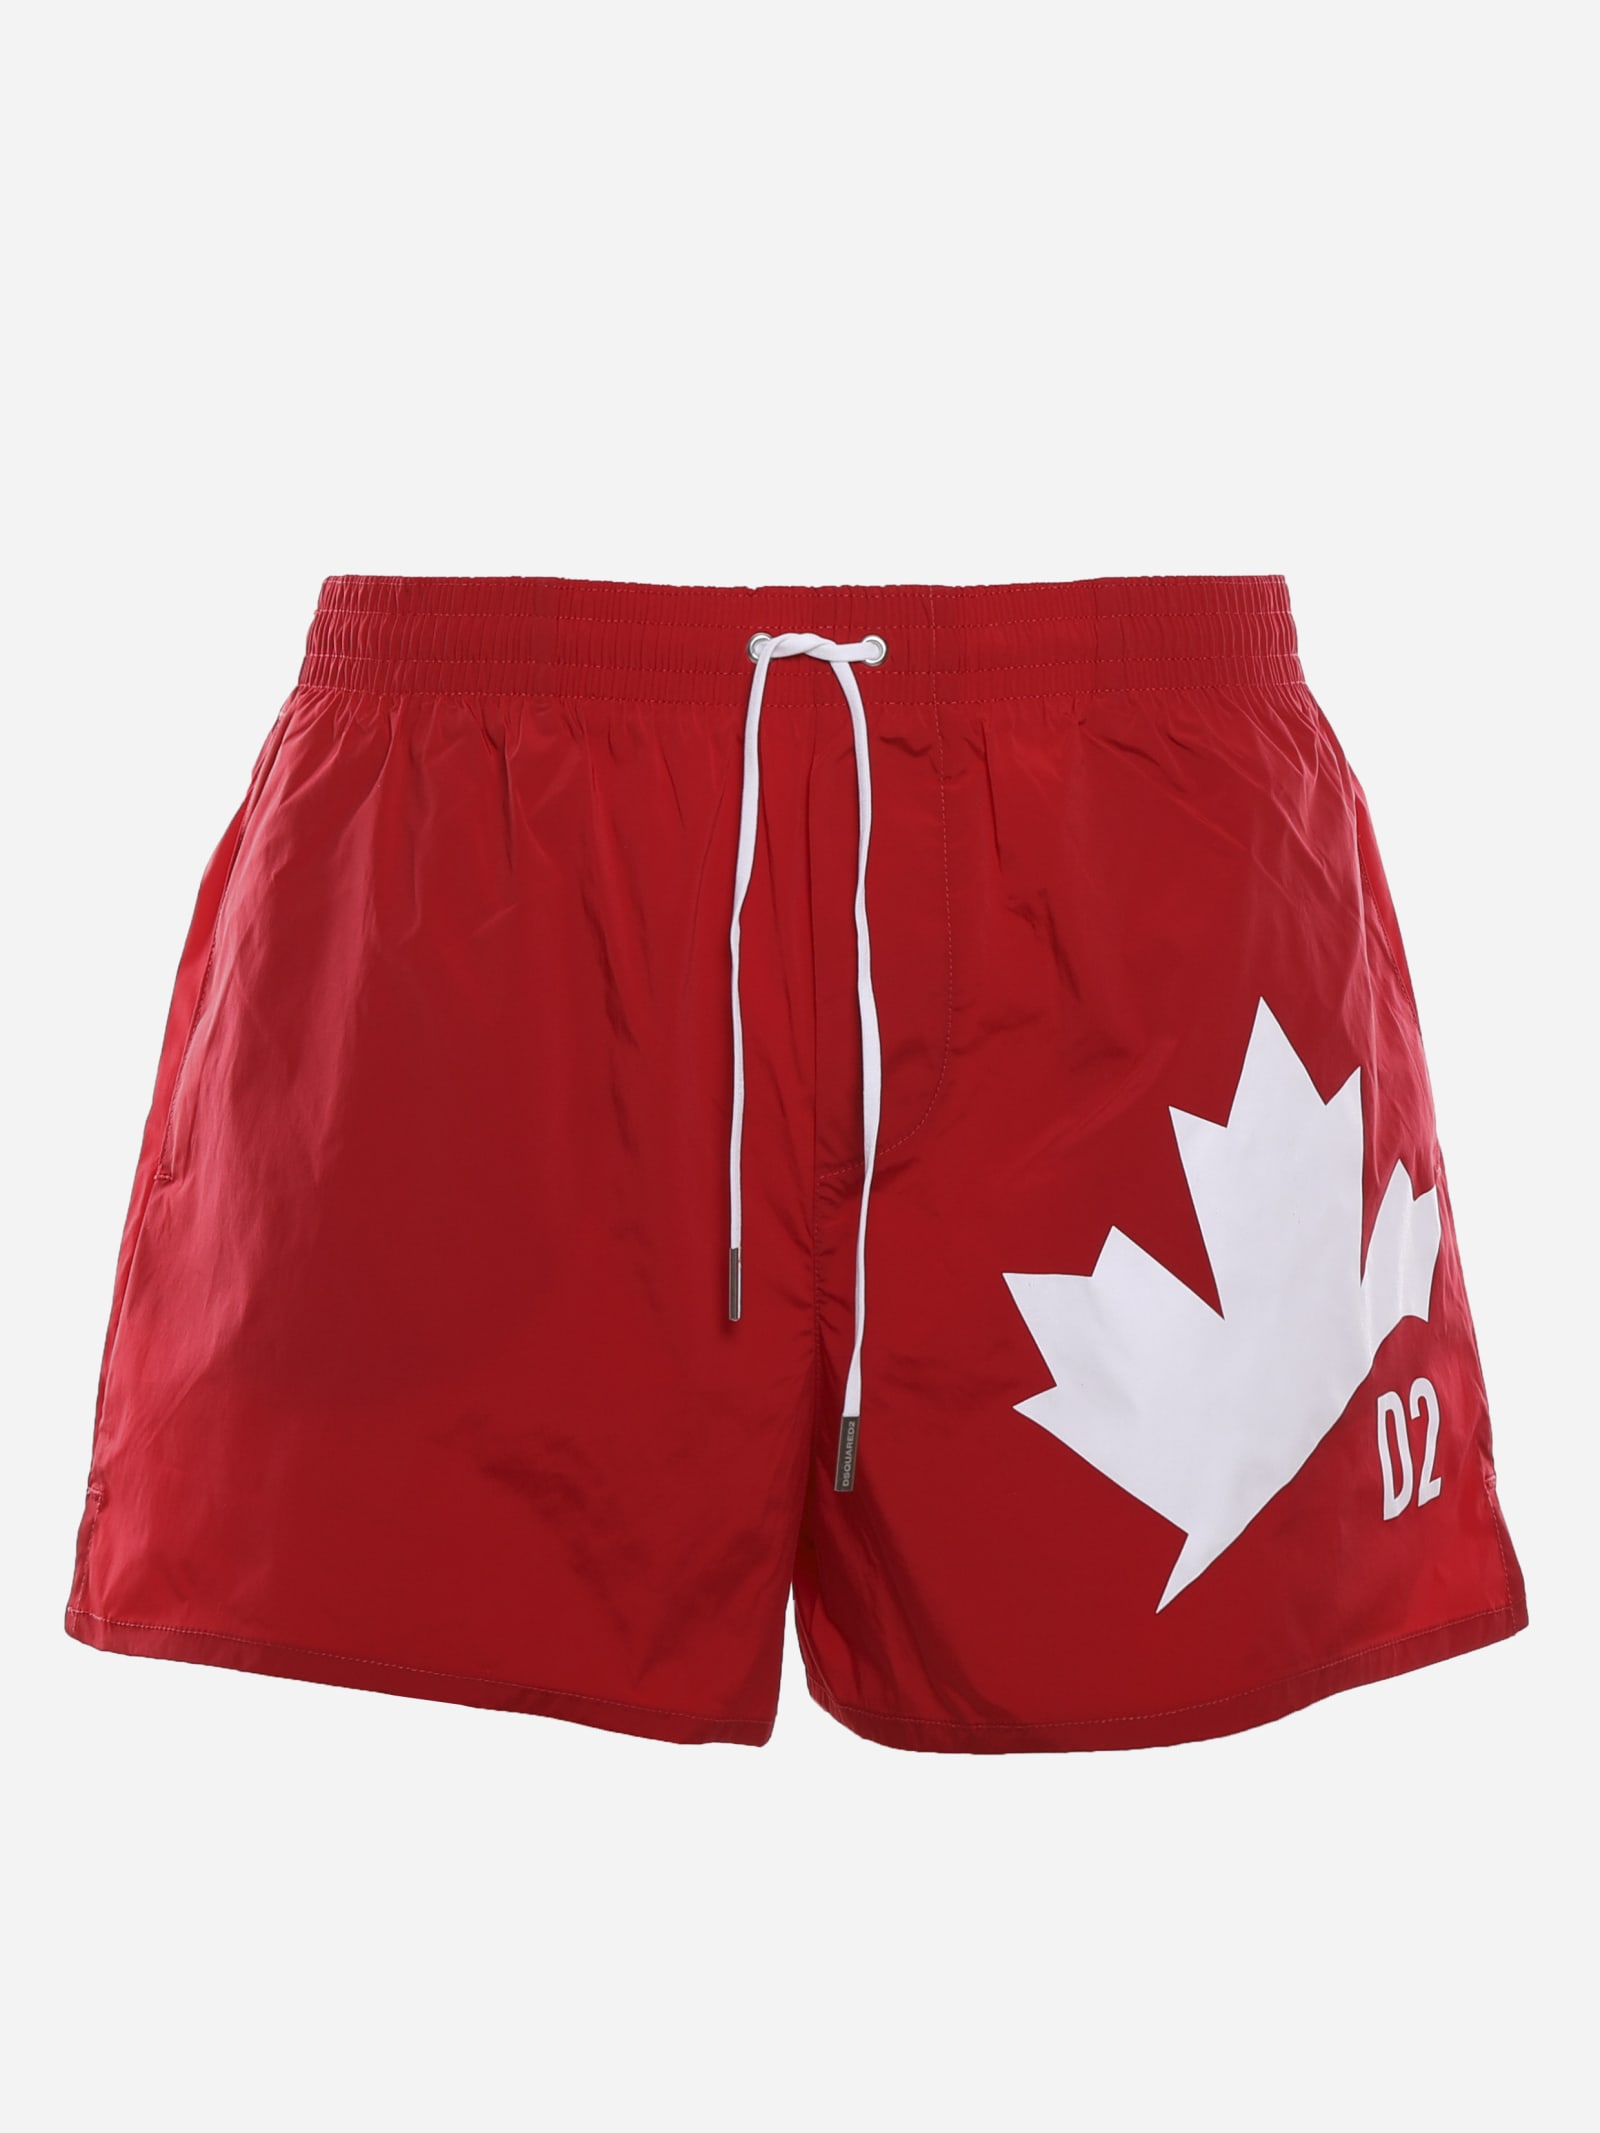 DSQUARED2 TECHNICAL FABRIC SWIM SHORTS WITH LOGO DETAIL,D7B643640 -600